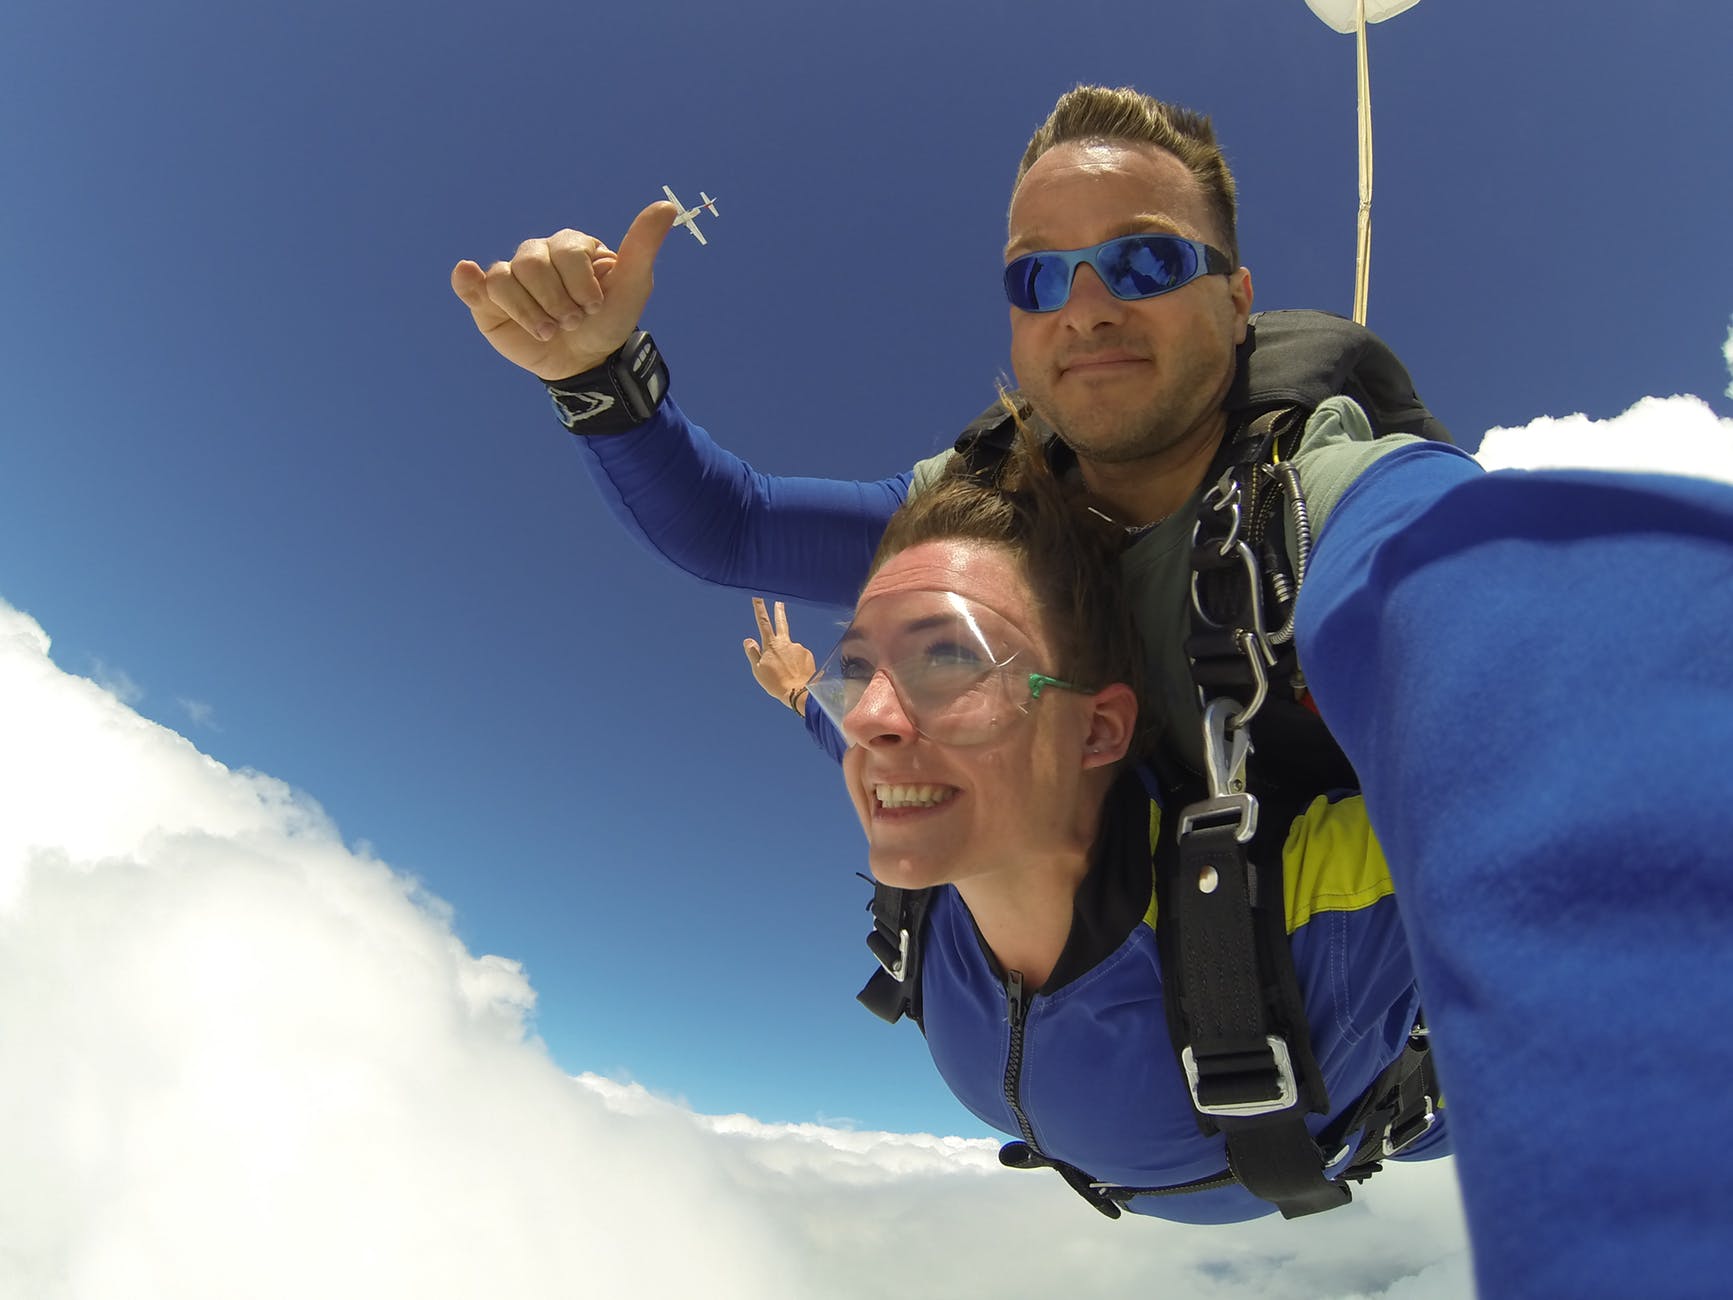 skydiving photo, man and woman